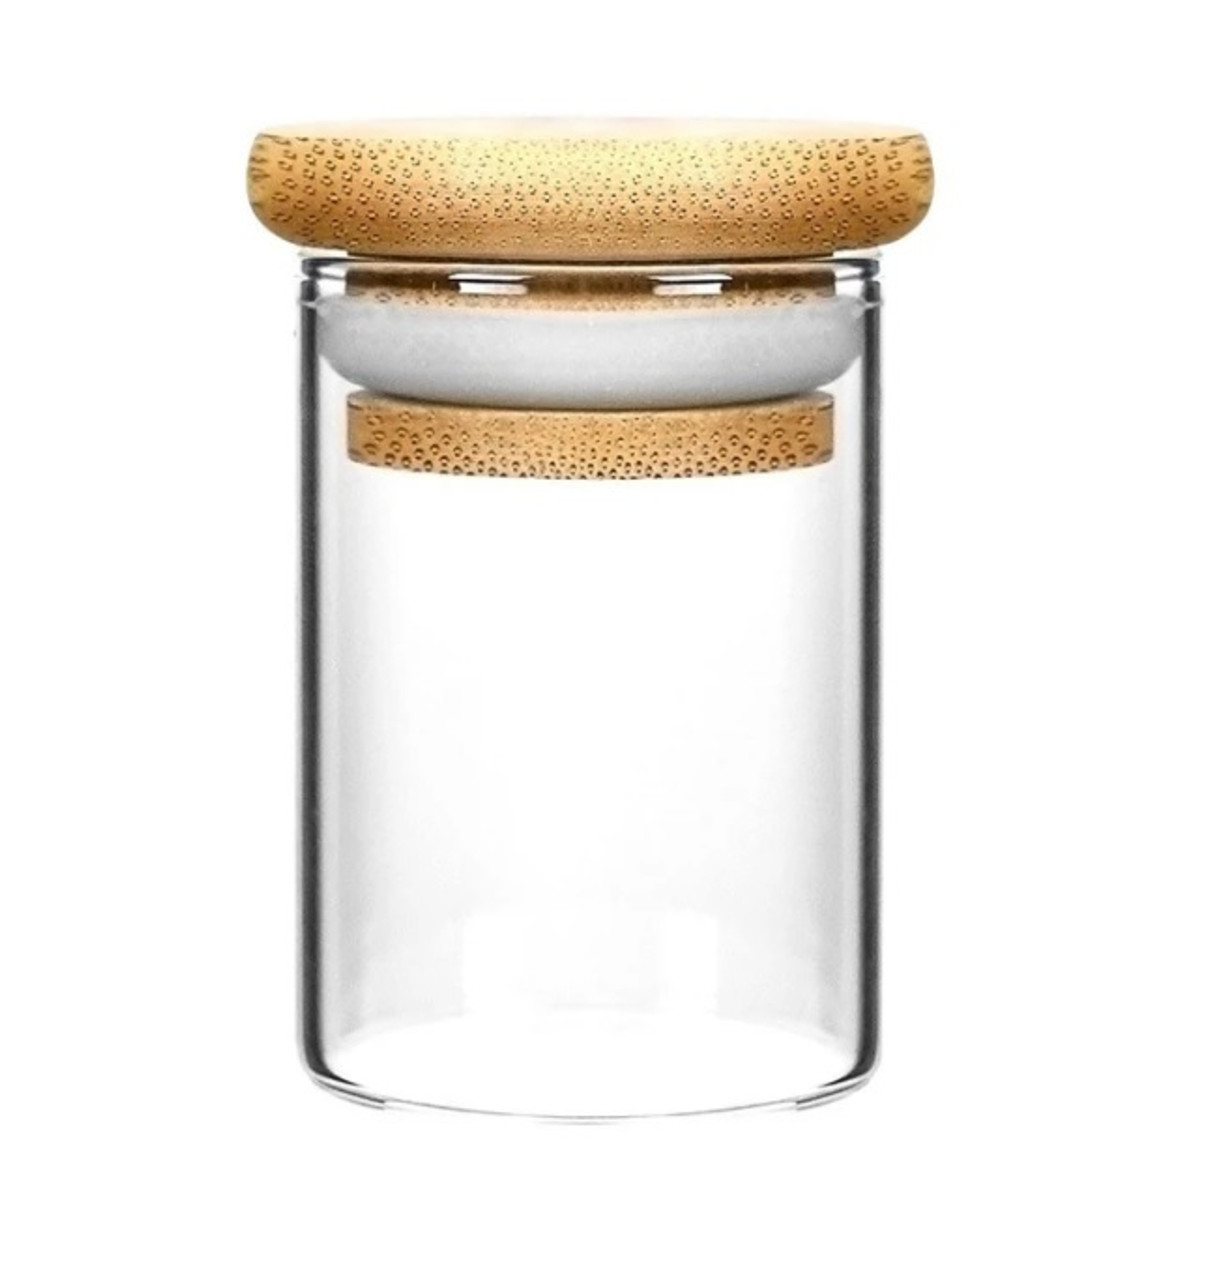 Spice Jar With Bamboo Lid, 3 Sizes to Choose From Spice Jar, Spice